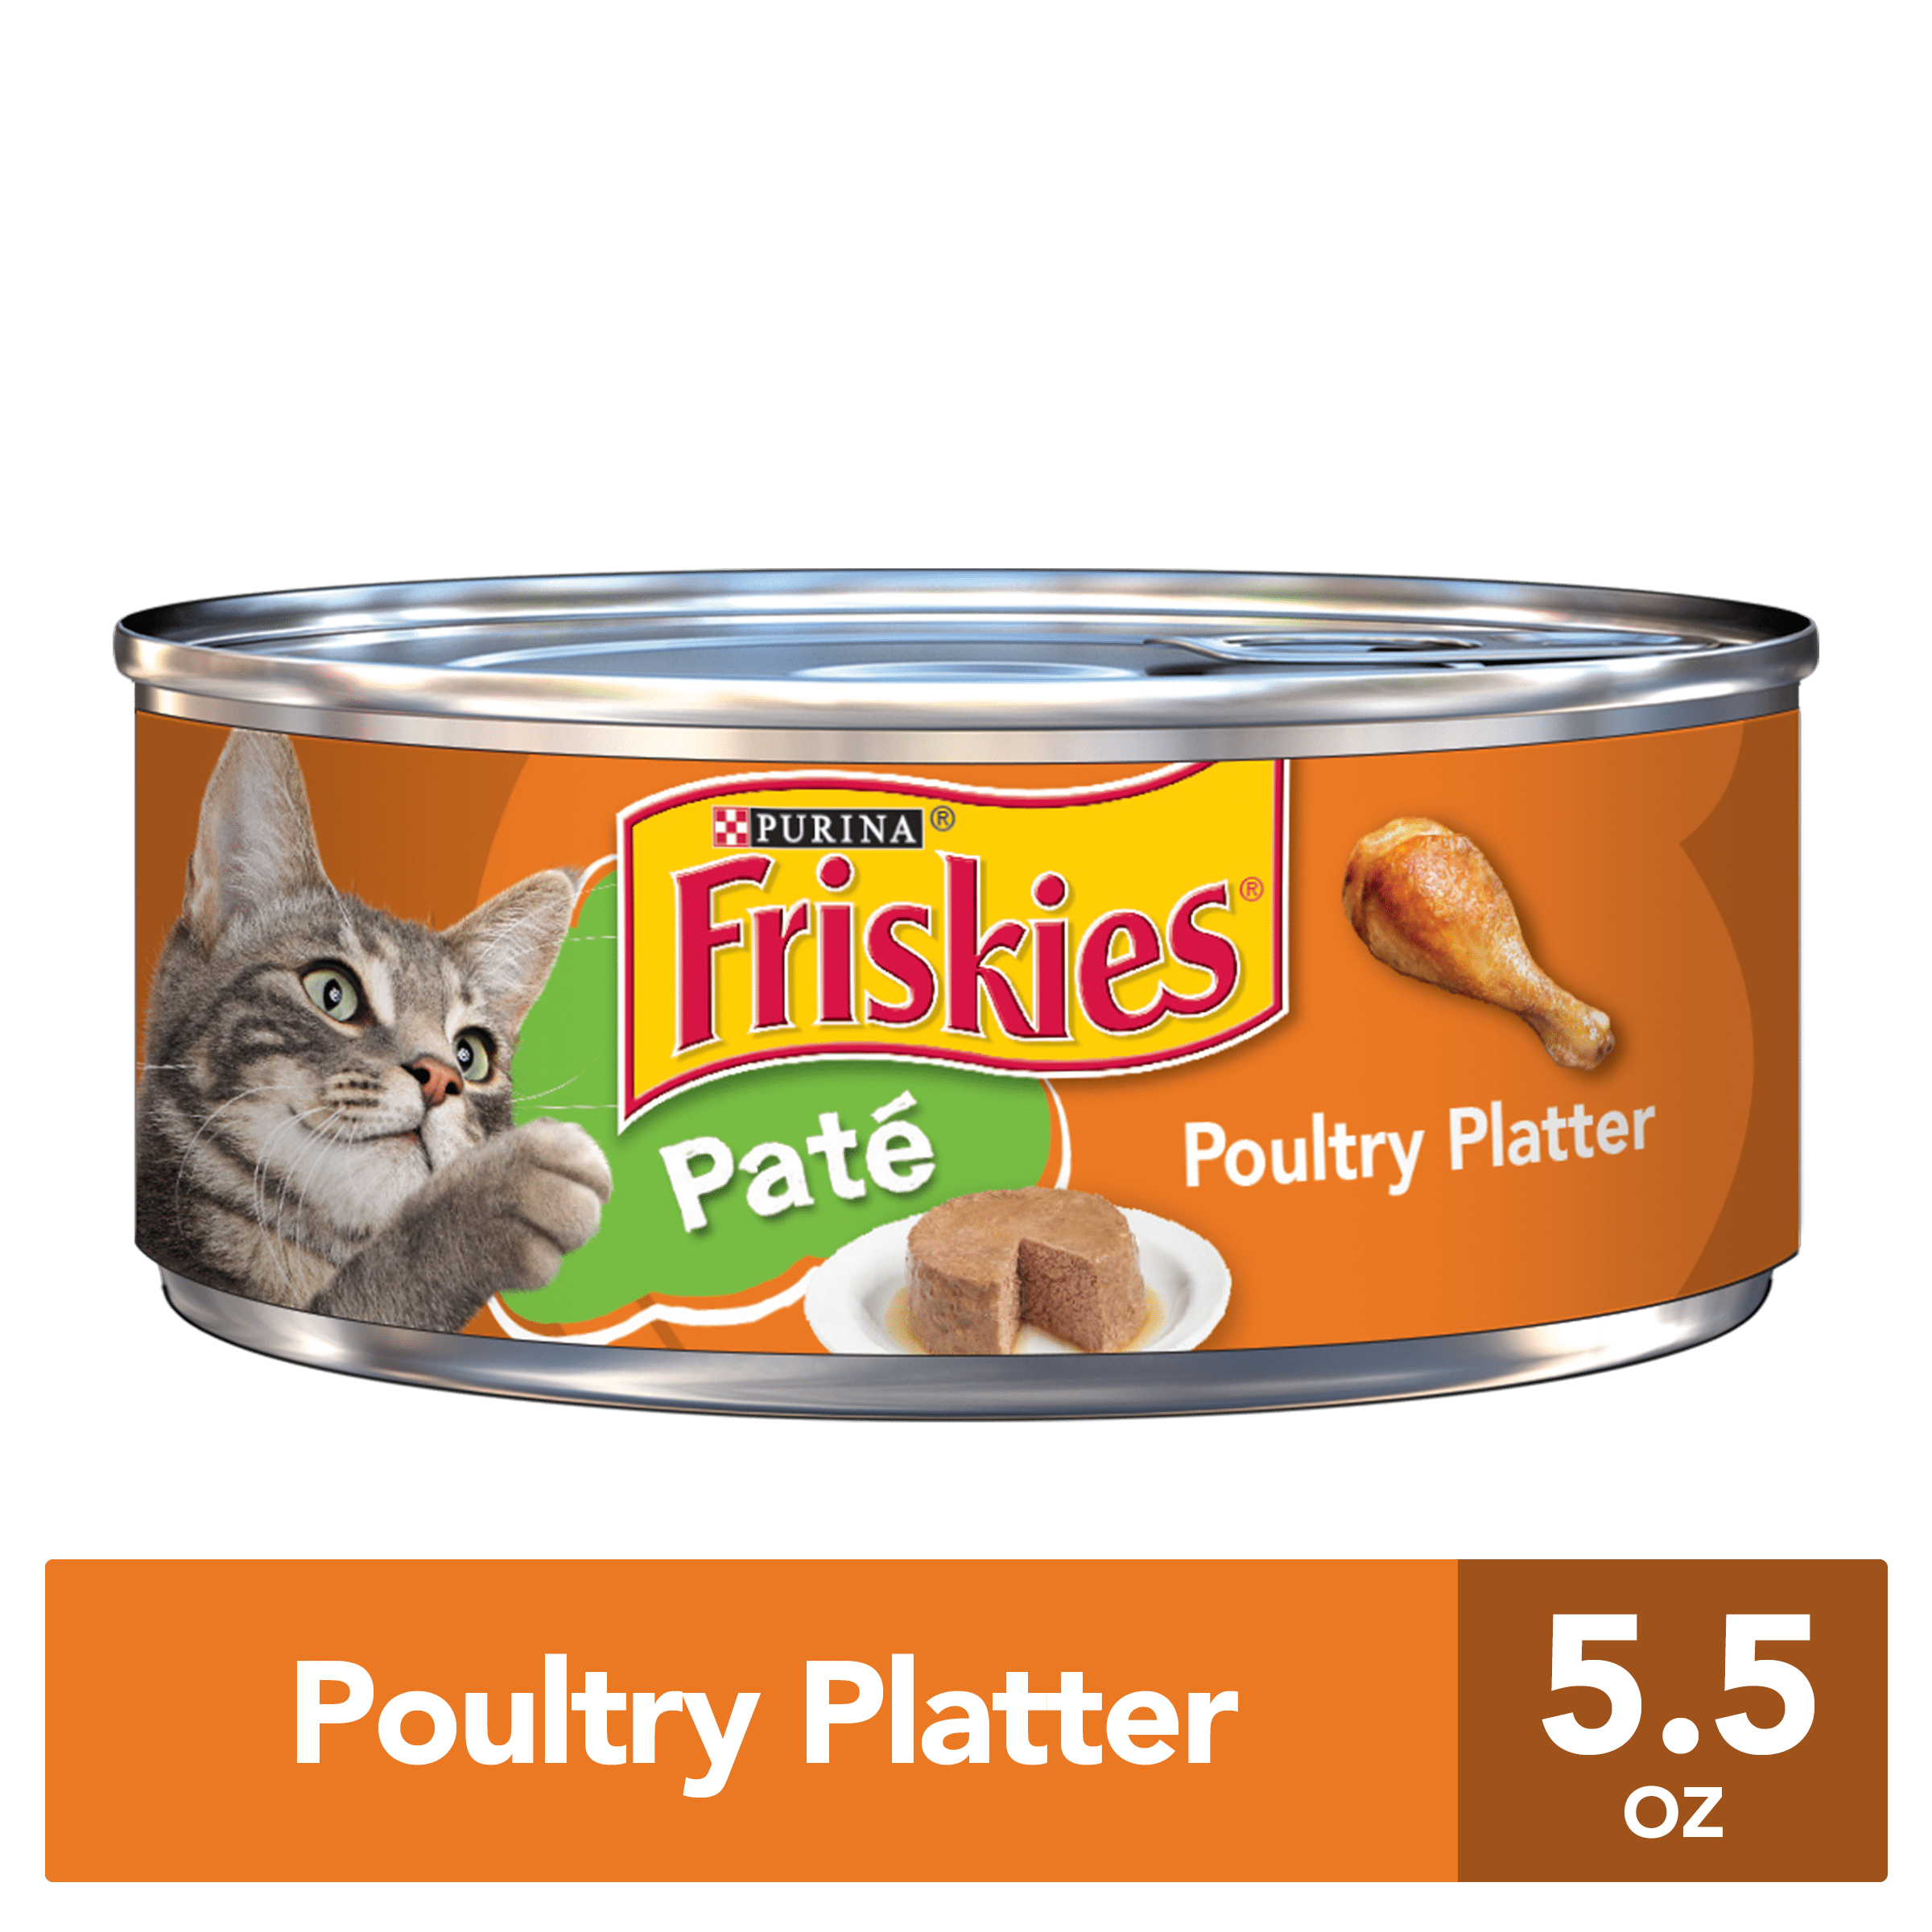 Purina Friskies Pate Wet Cat Food, Poultry Platter 5.5 oz. Can